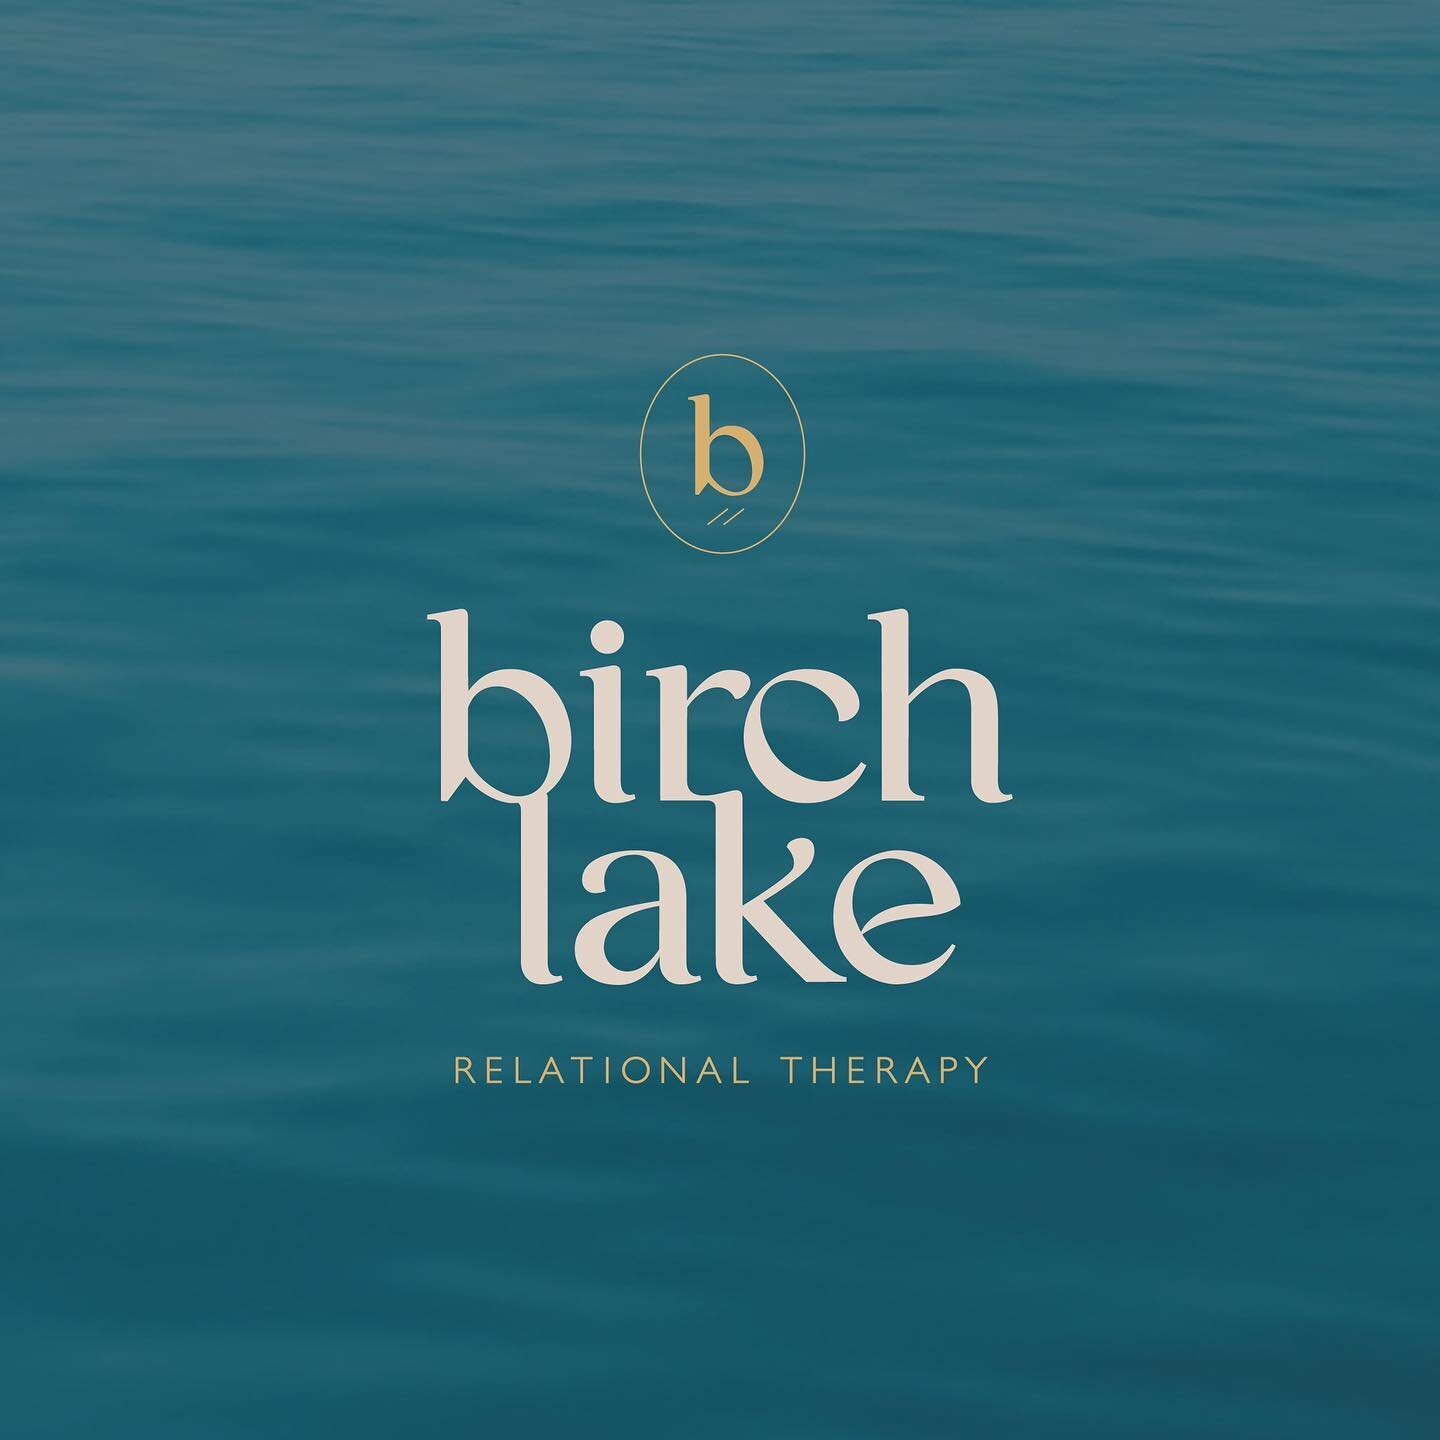 ✨ Client Spotlight ✨

Birch Lake Relational Therapy provides relationship, individual and sex therapy in a private practice setting in the Twin Cities. With compassion, care, accountability, and a little bit of humor, Birch Lake Relational Therapy st